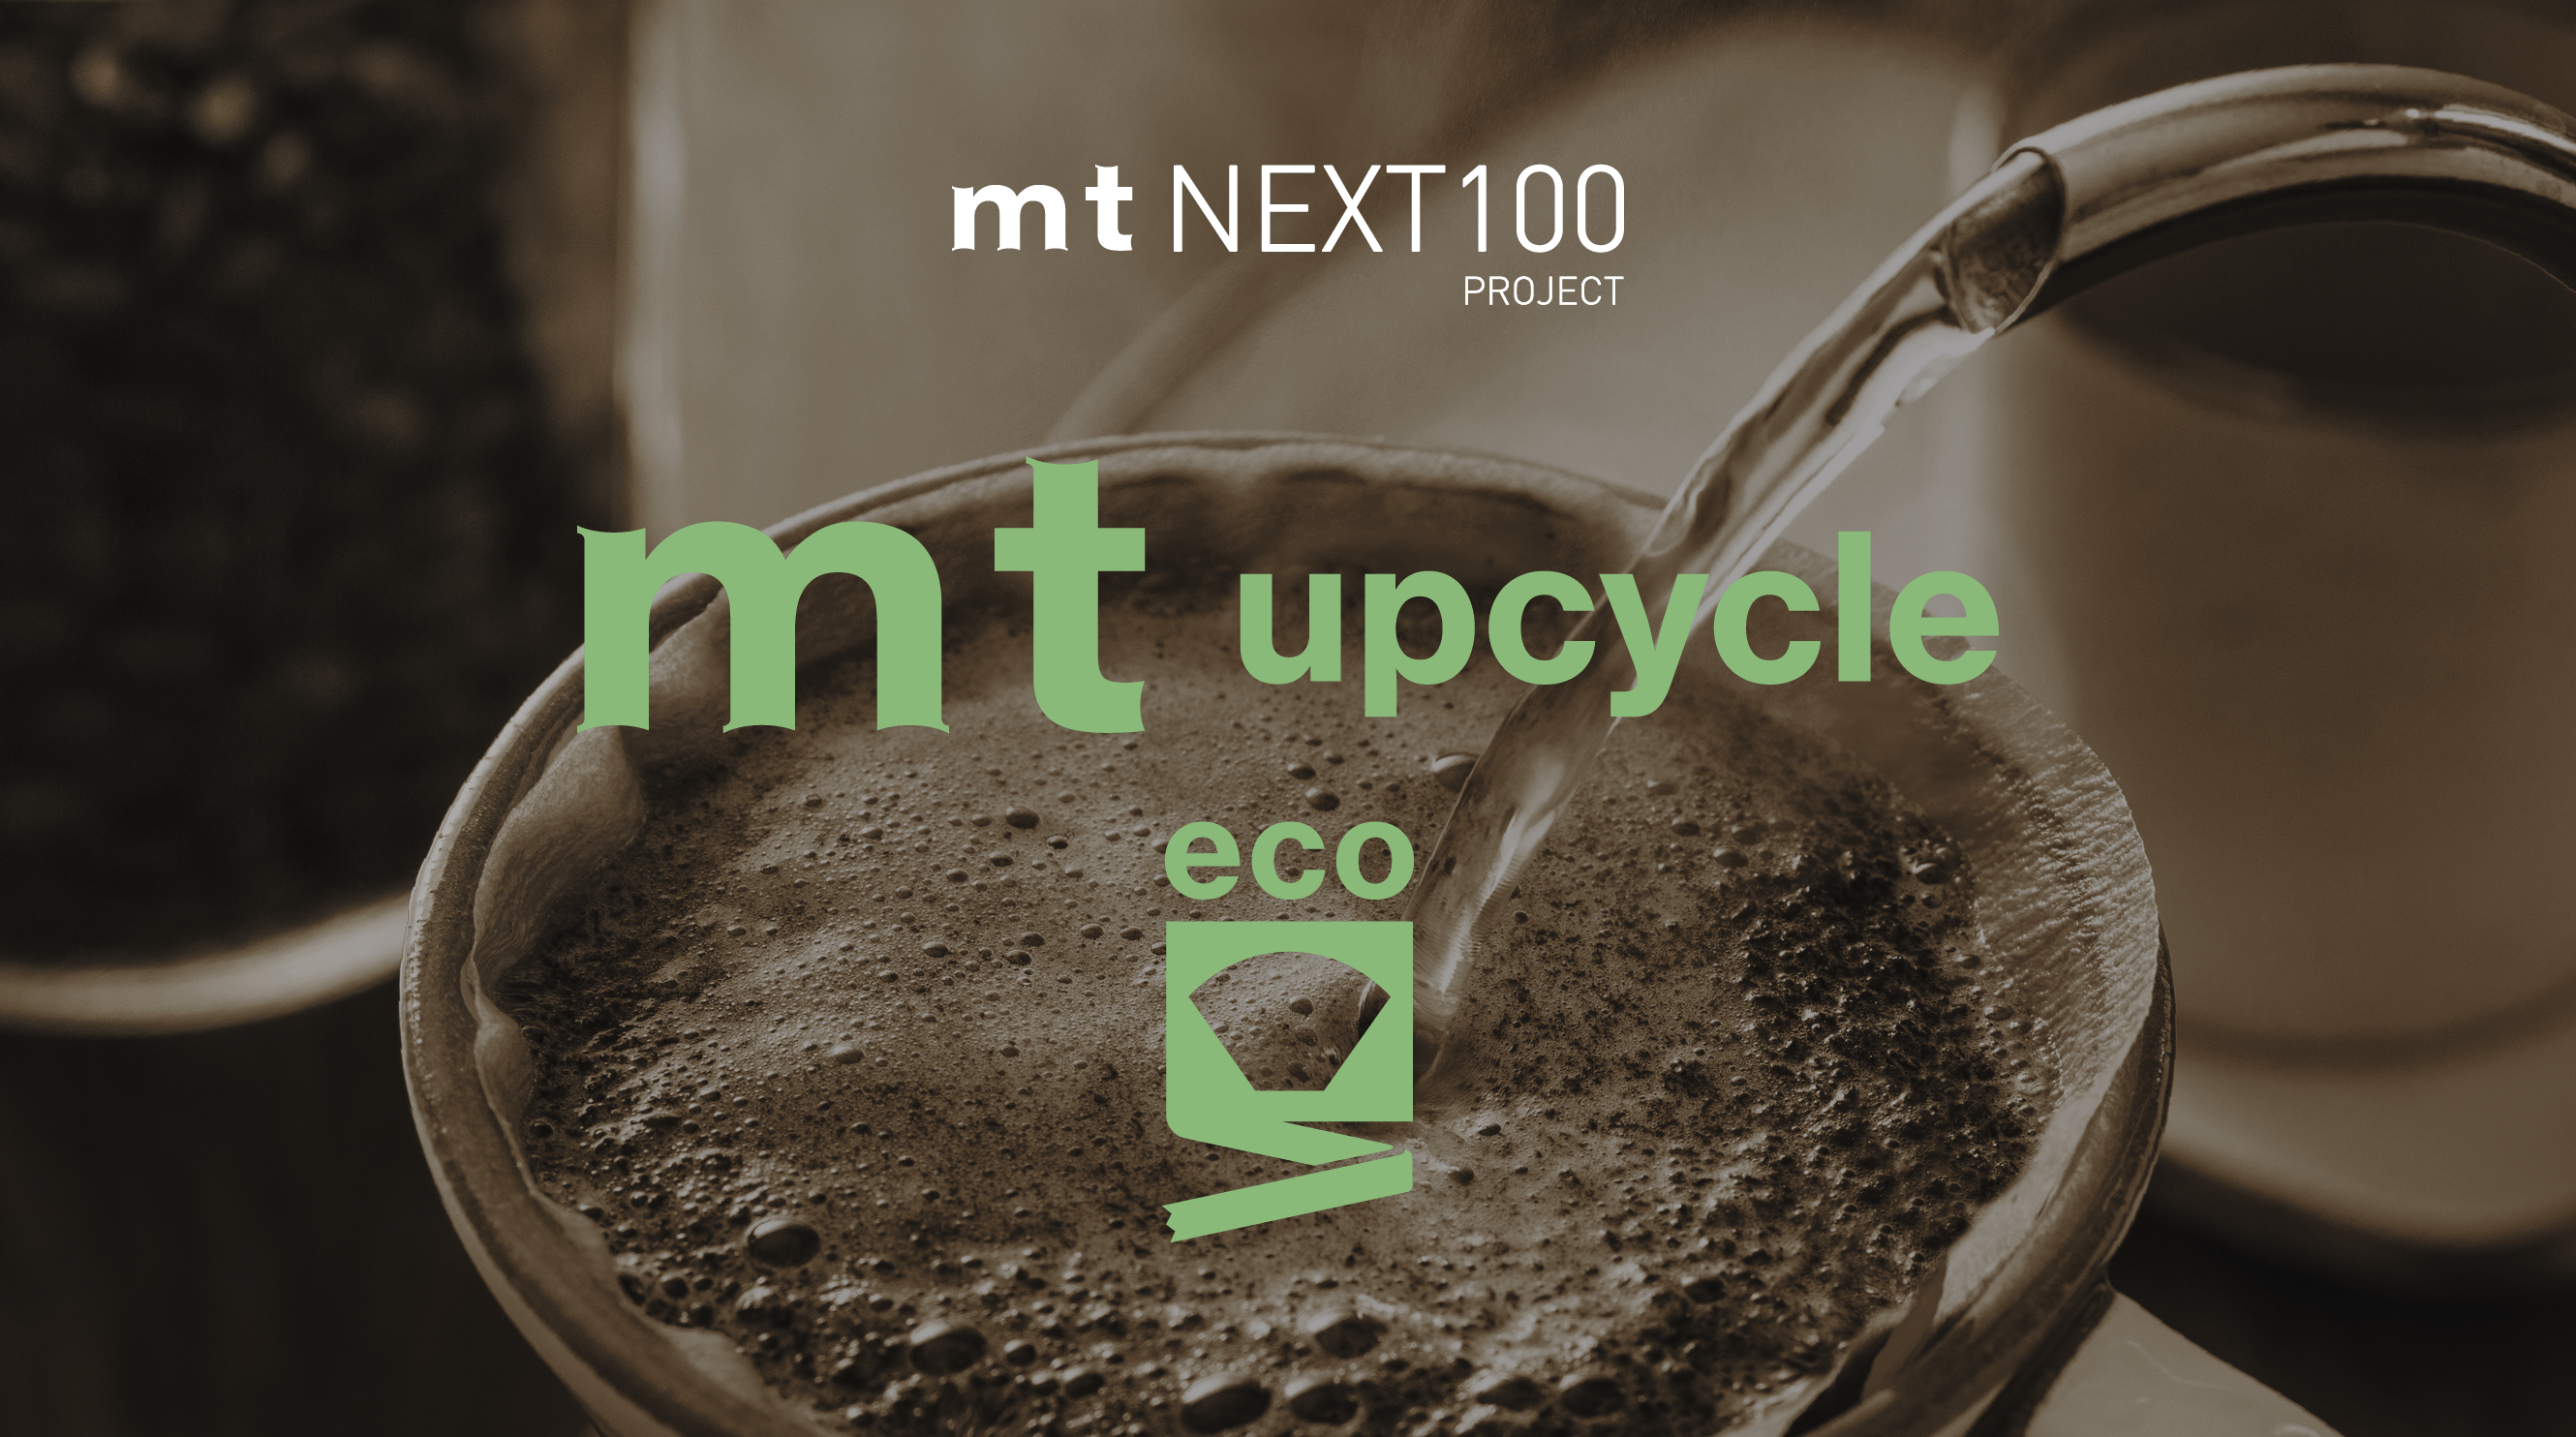 mt NEXT100 PROJECT mt upcycle